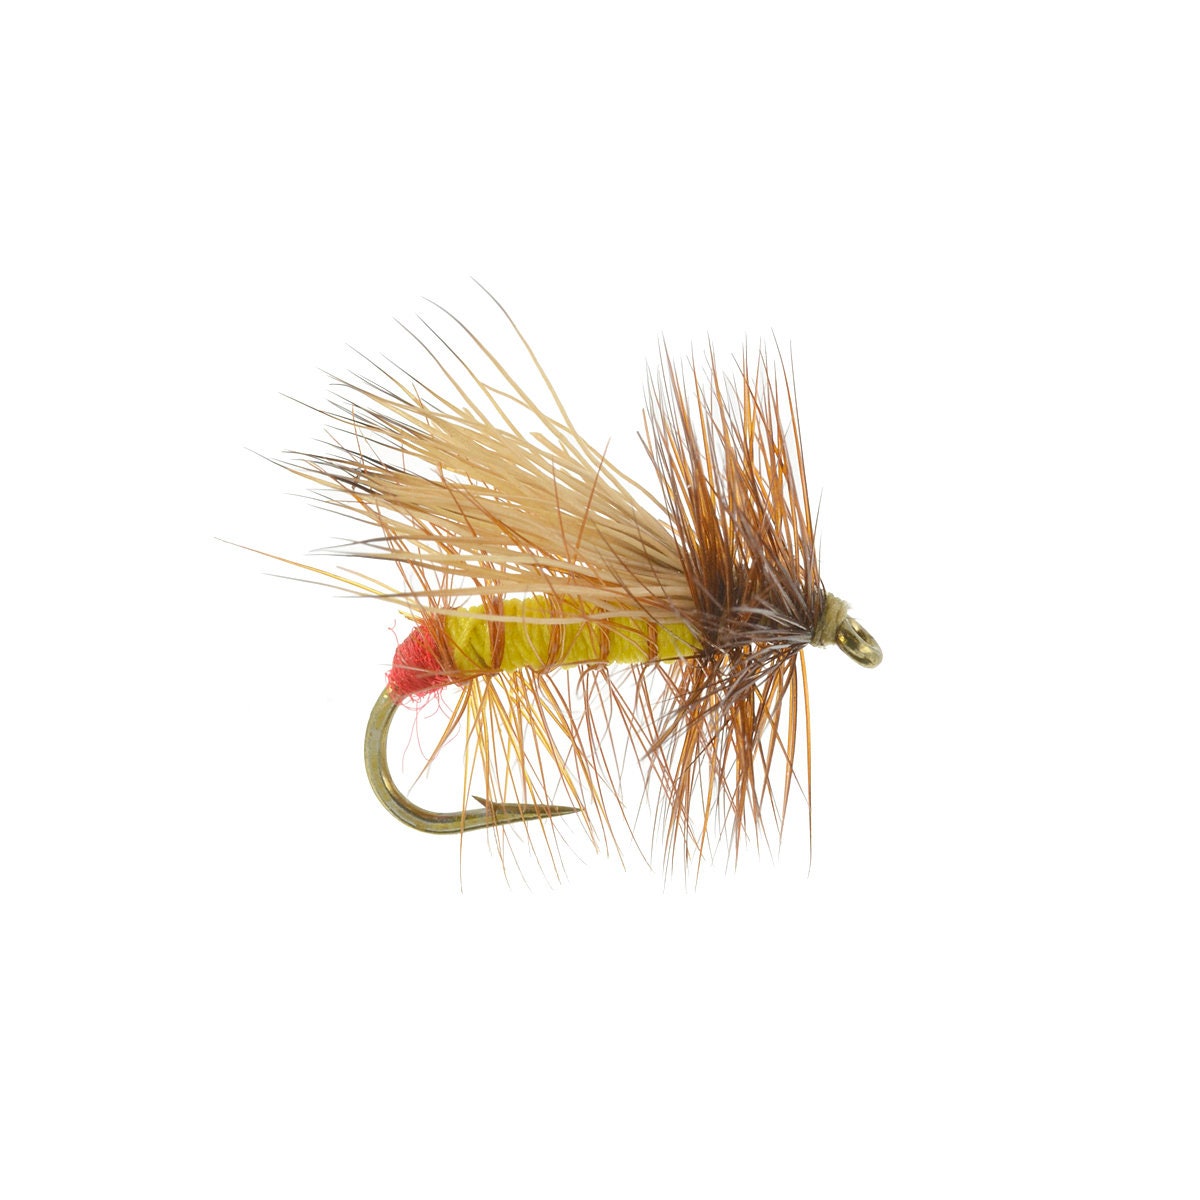 Adams Superfly Dry Fly the Best Dry Fly Patterns Hand Tied Dry Fly